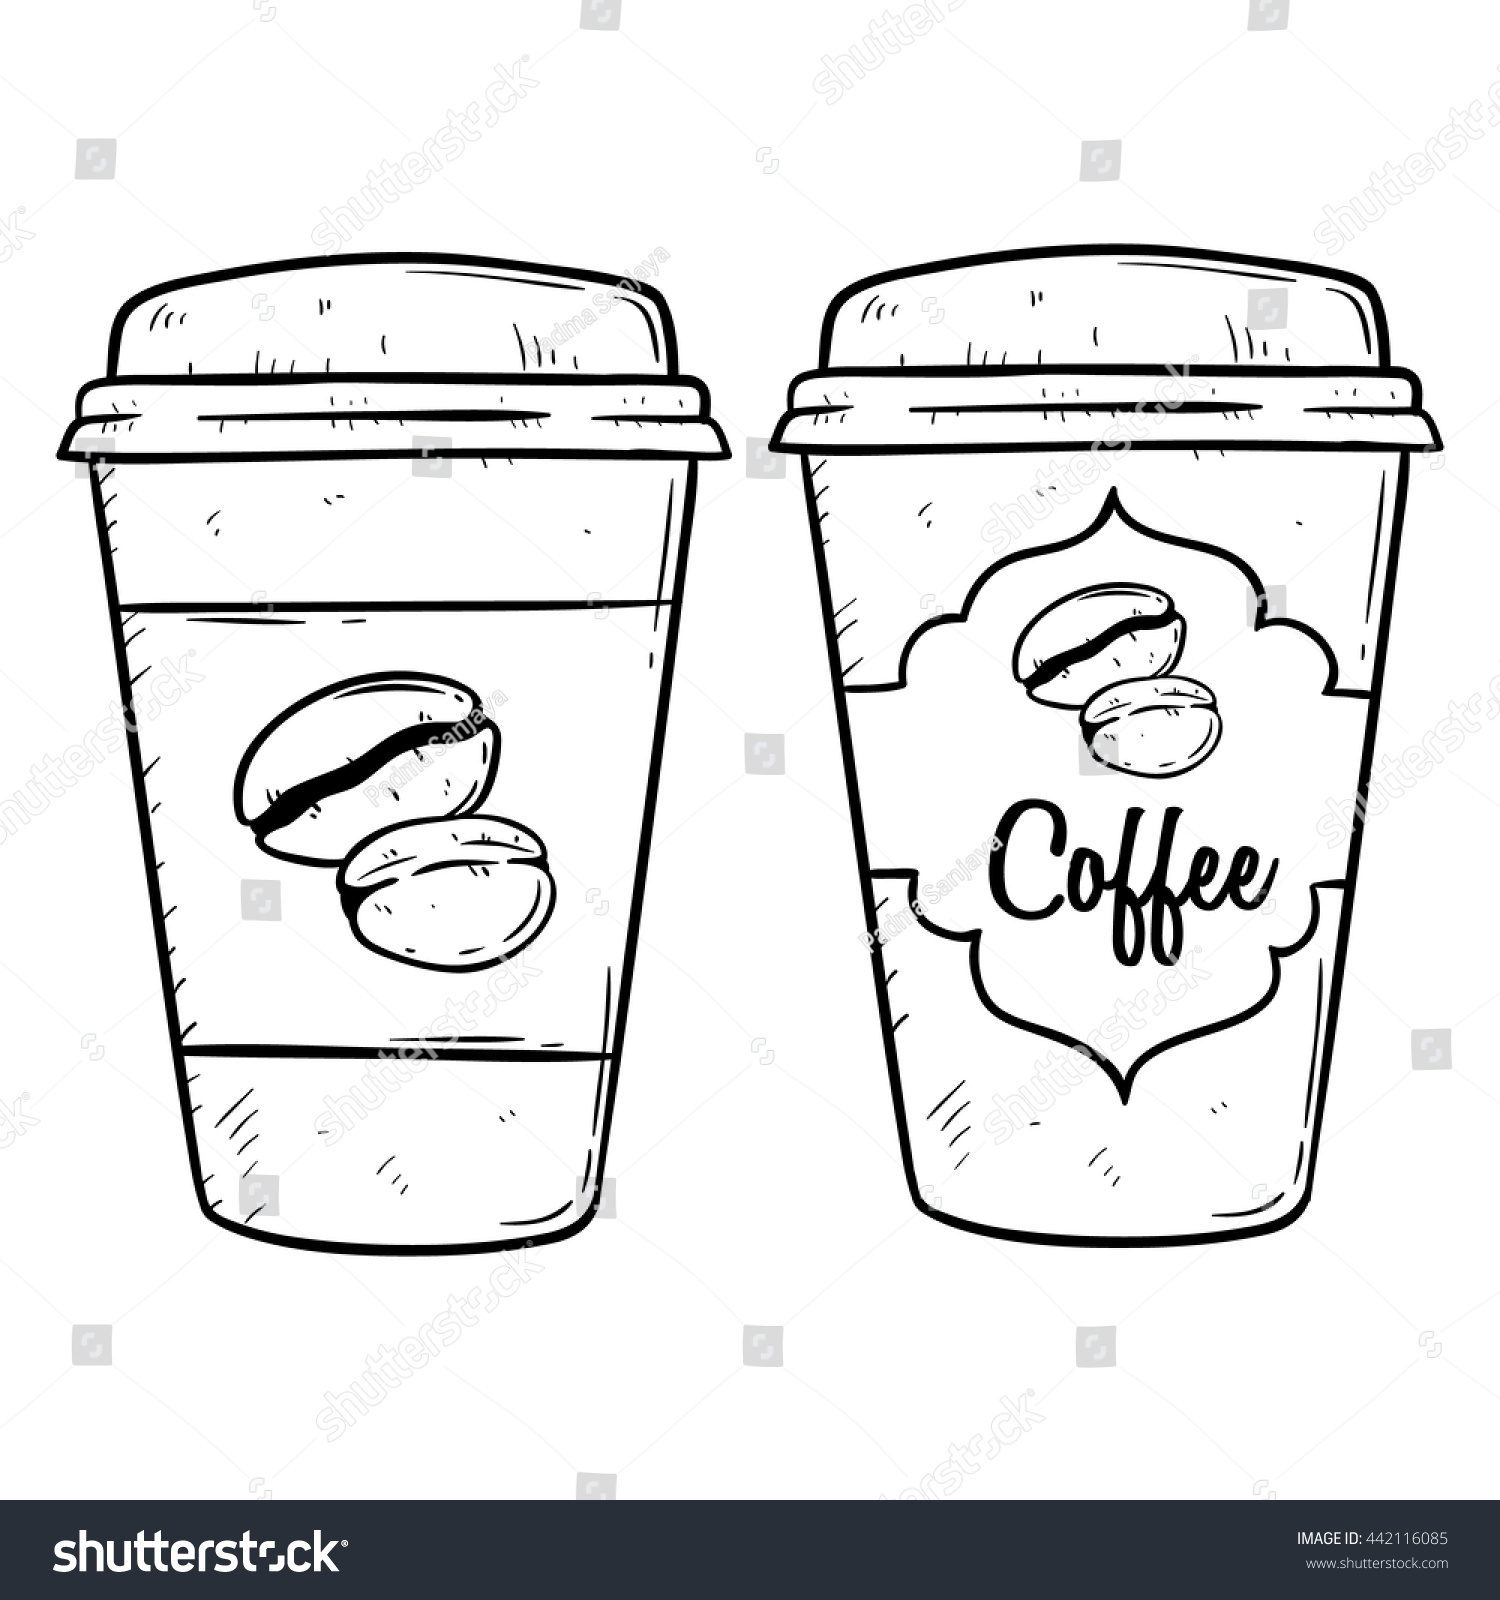 Black White Paper Coffee Cup Doodle Stock Vector Royalty Free